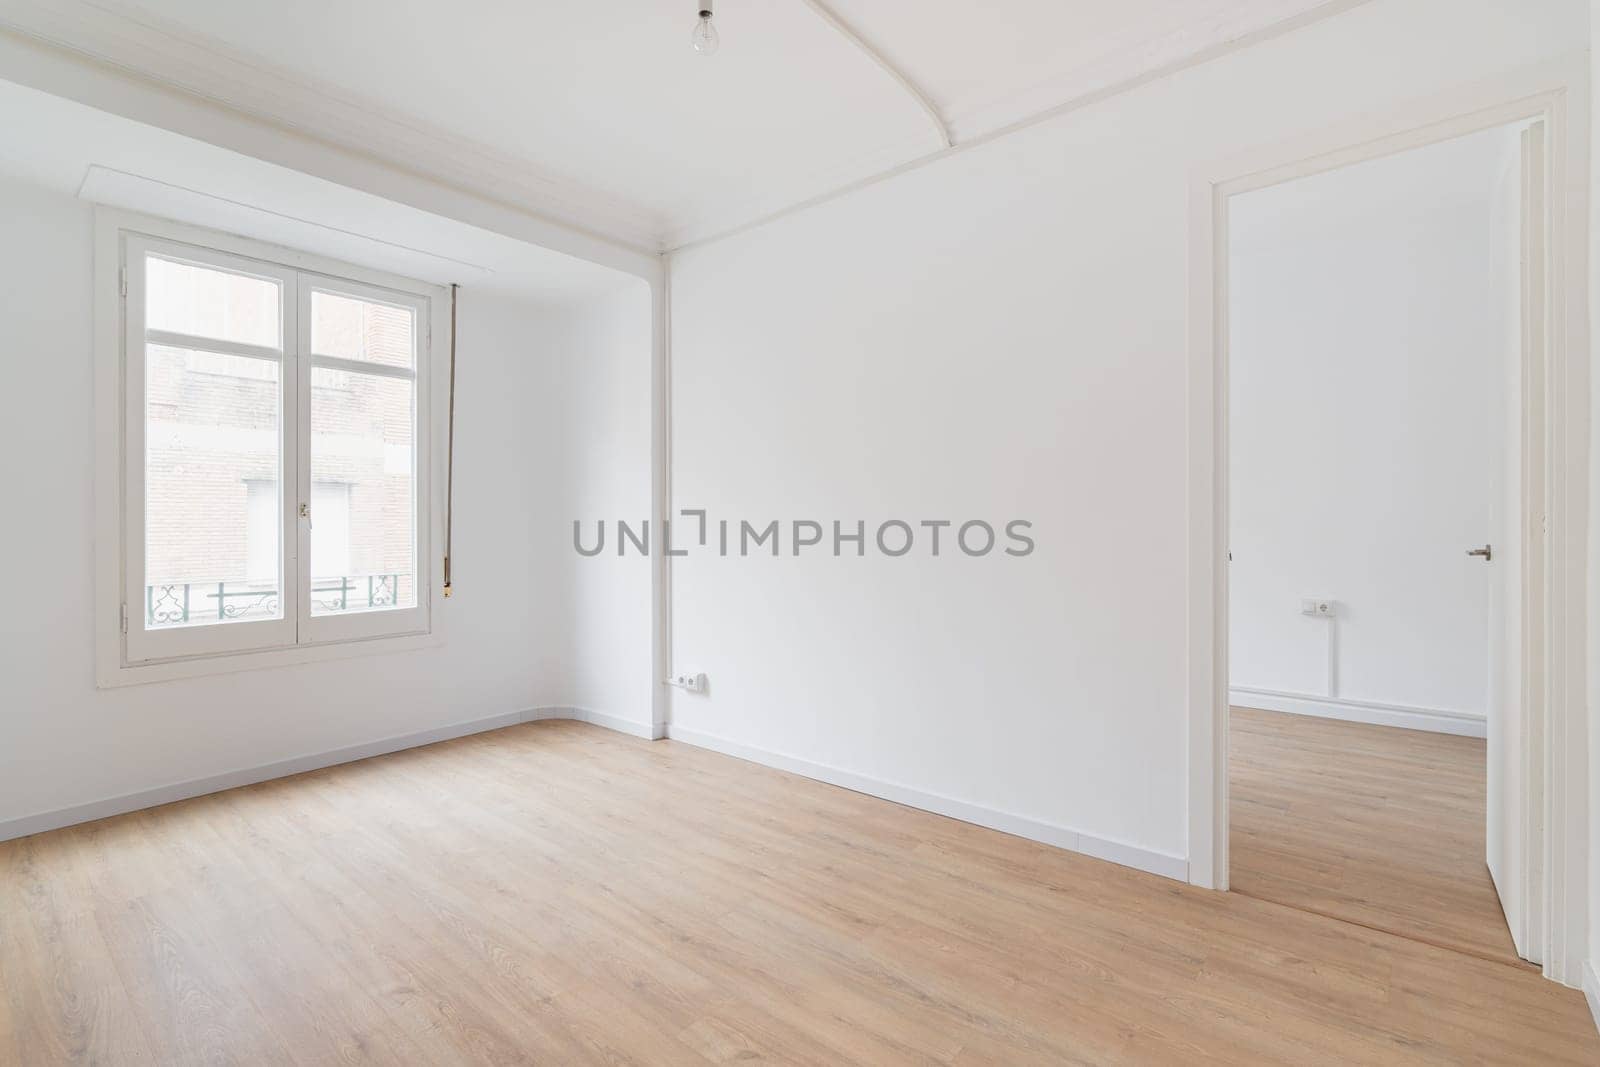 Bright white spacious unfurnished apartment with an window and wooden textured laminate. Concept of modern building or moving to new apartment. Interior design renovation by apavlin